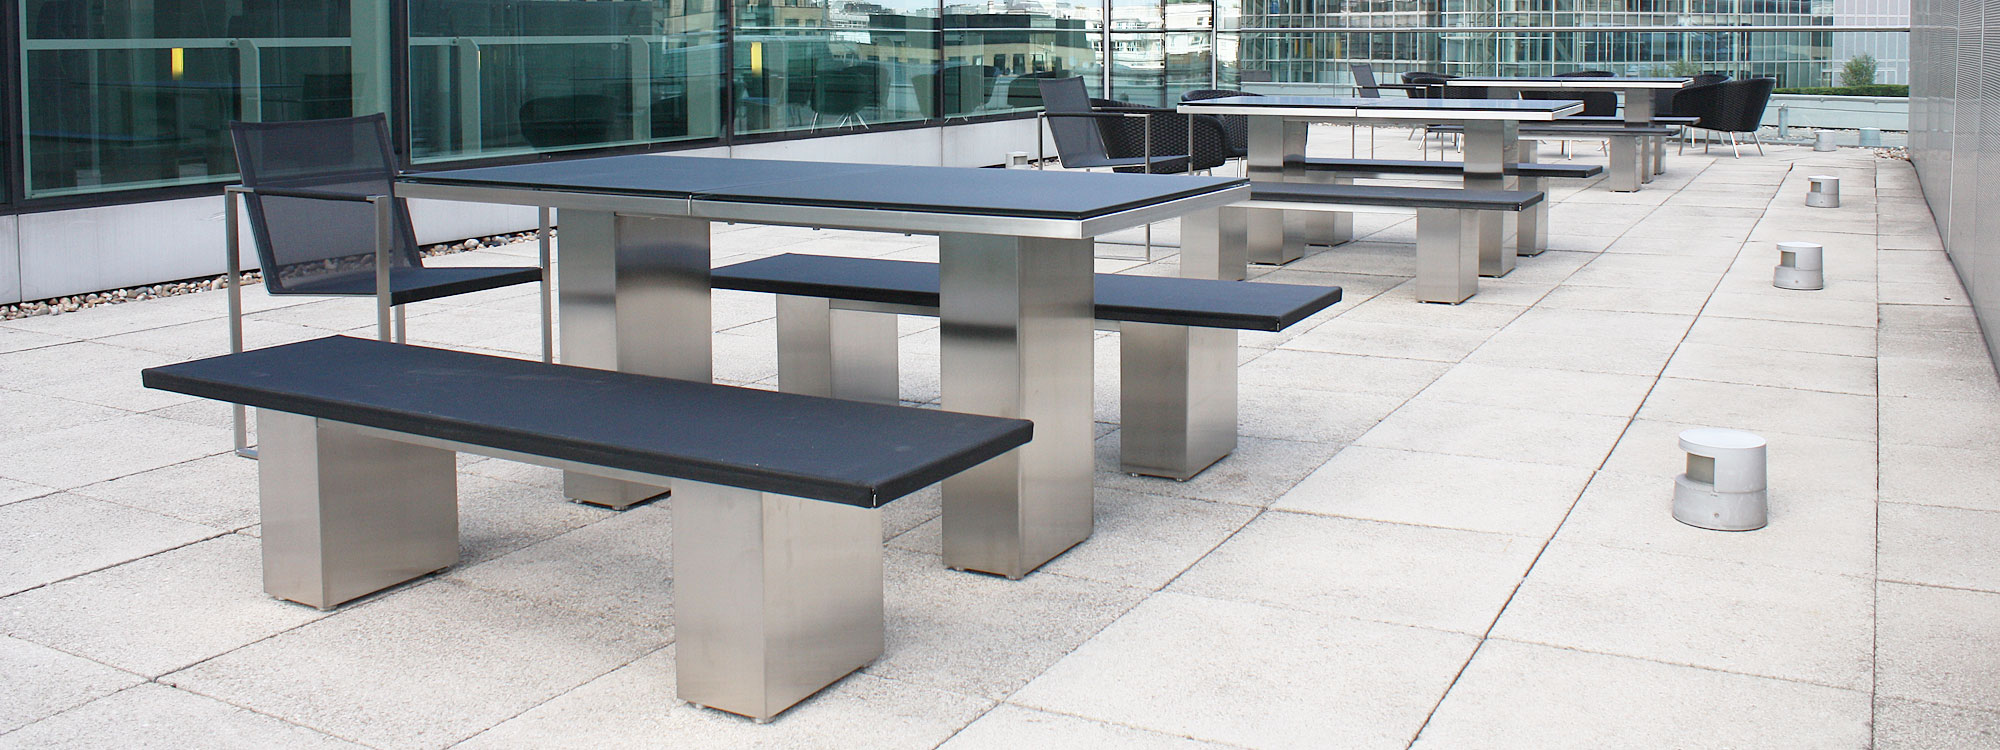 Image of City of London outdoor furniture installation of FueraDentro Doble table and benches